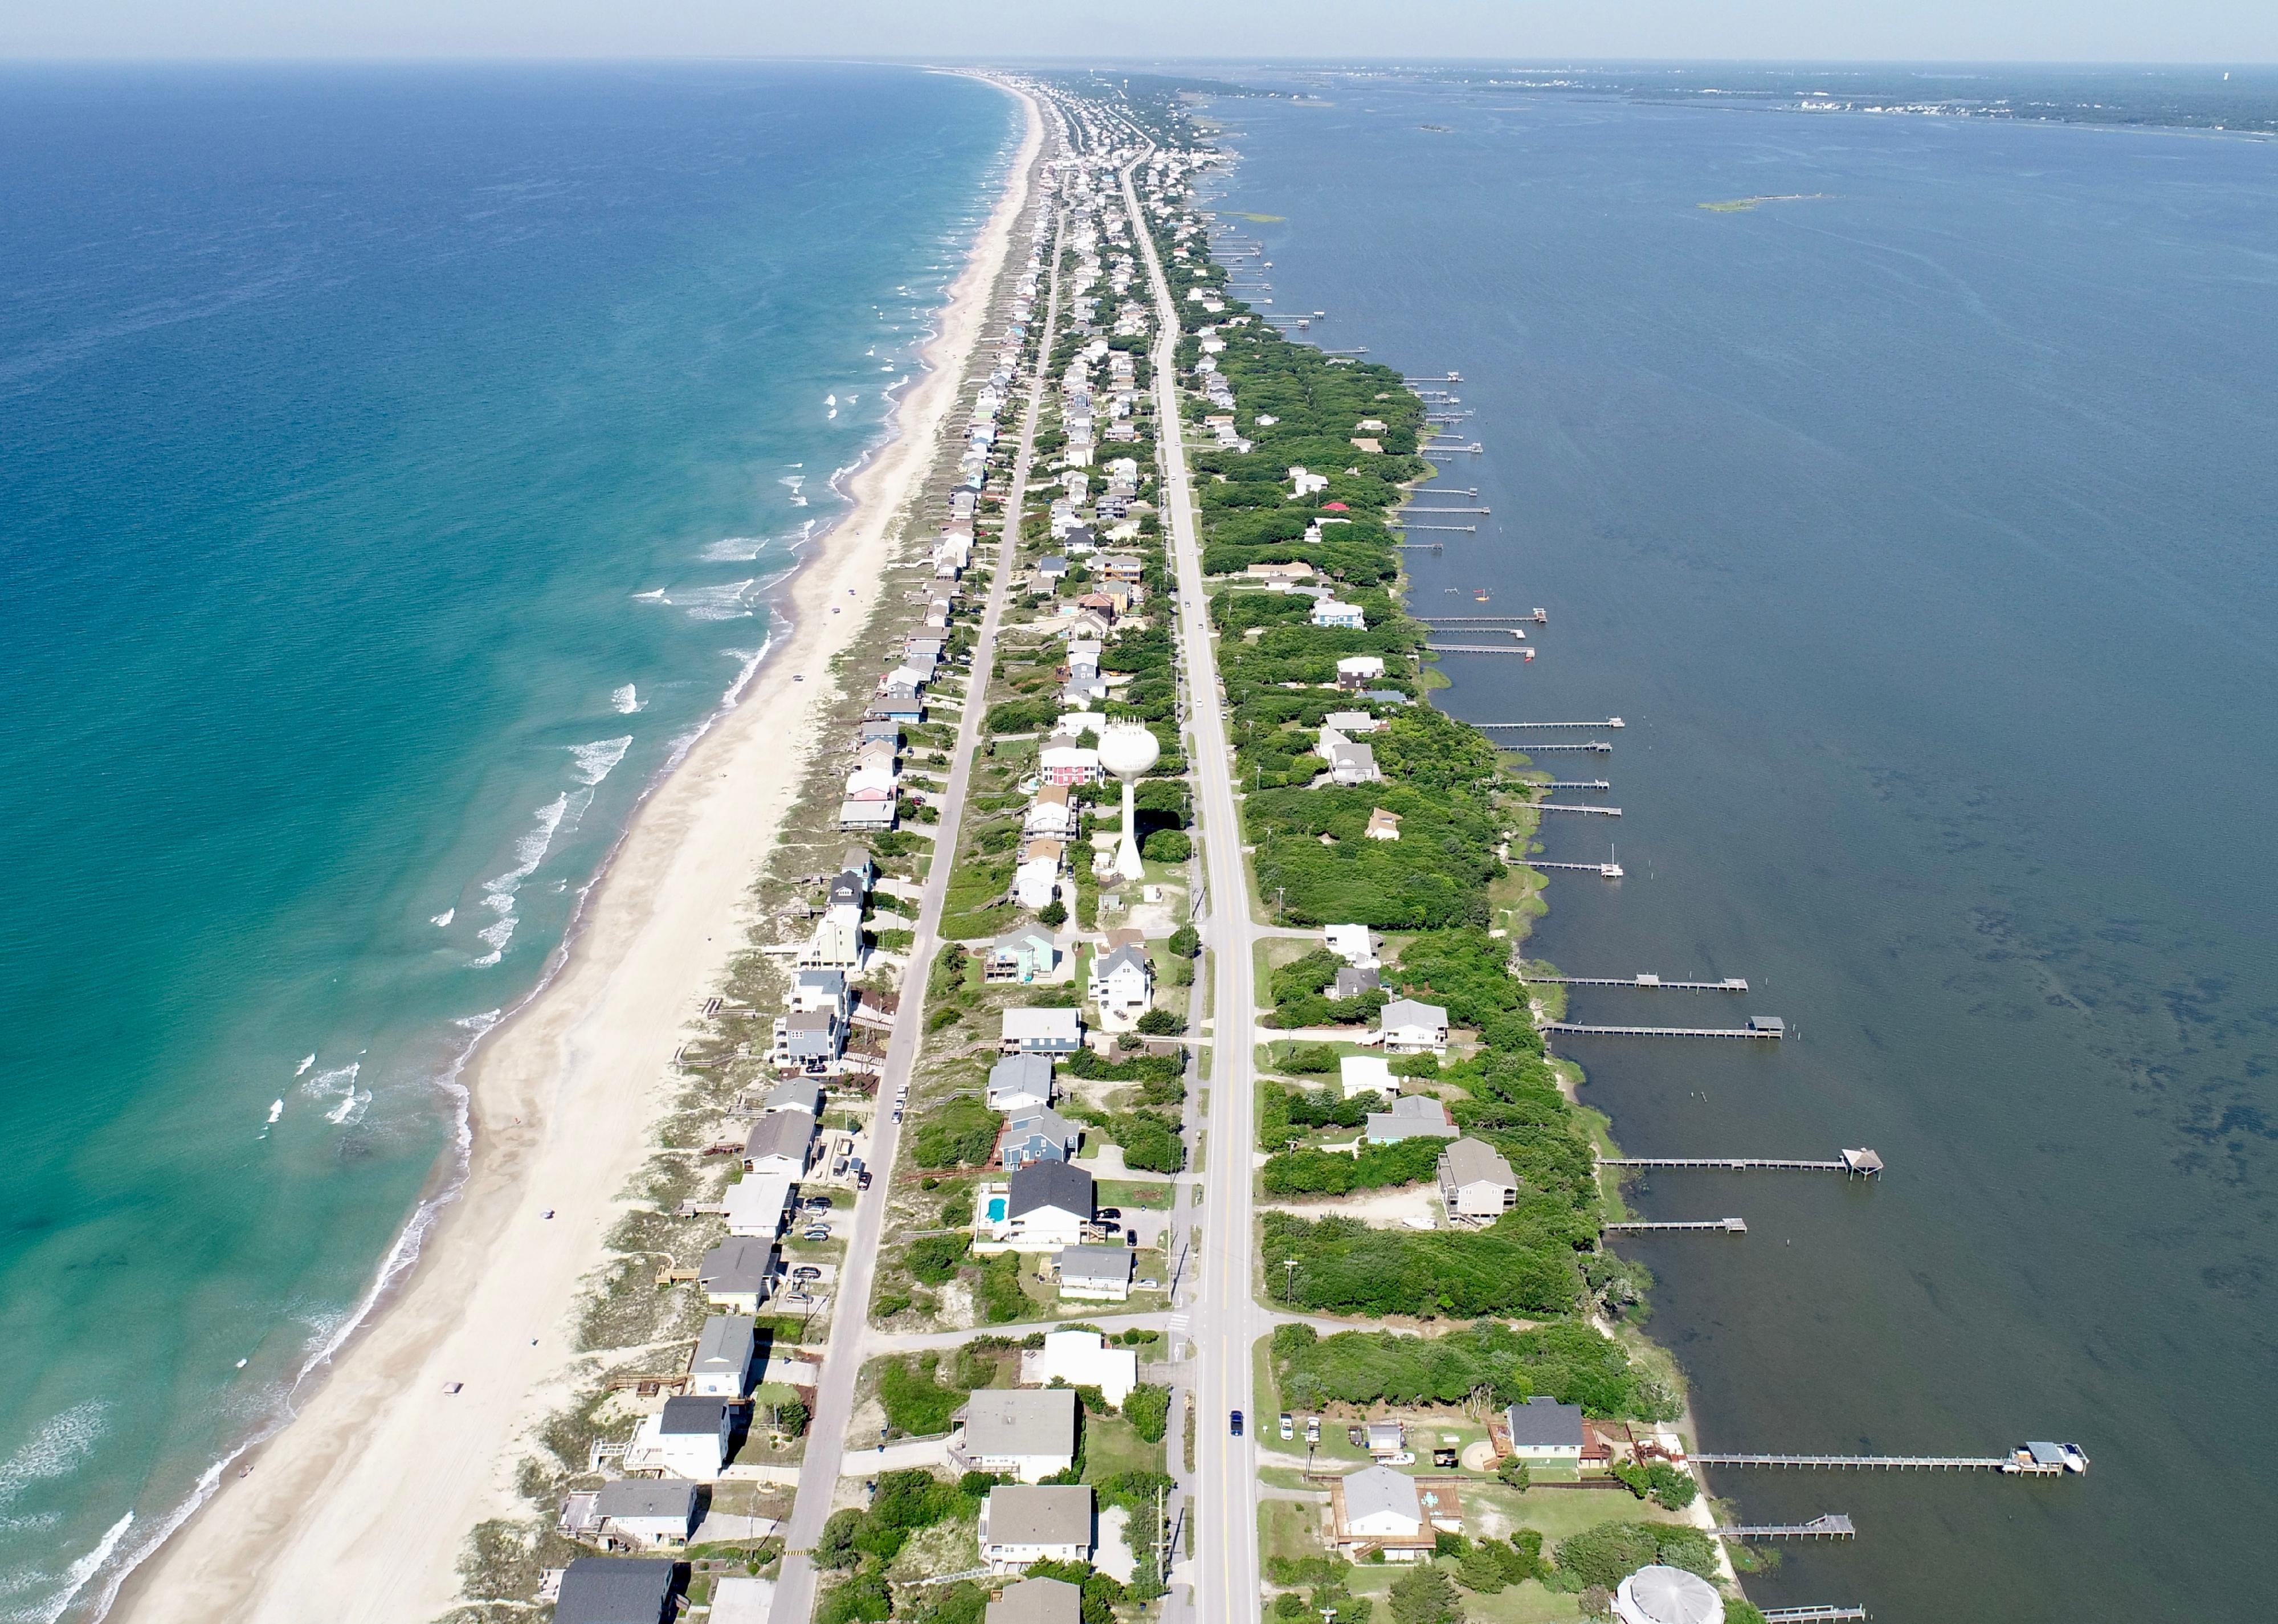 An aerial view of Emerald Isle